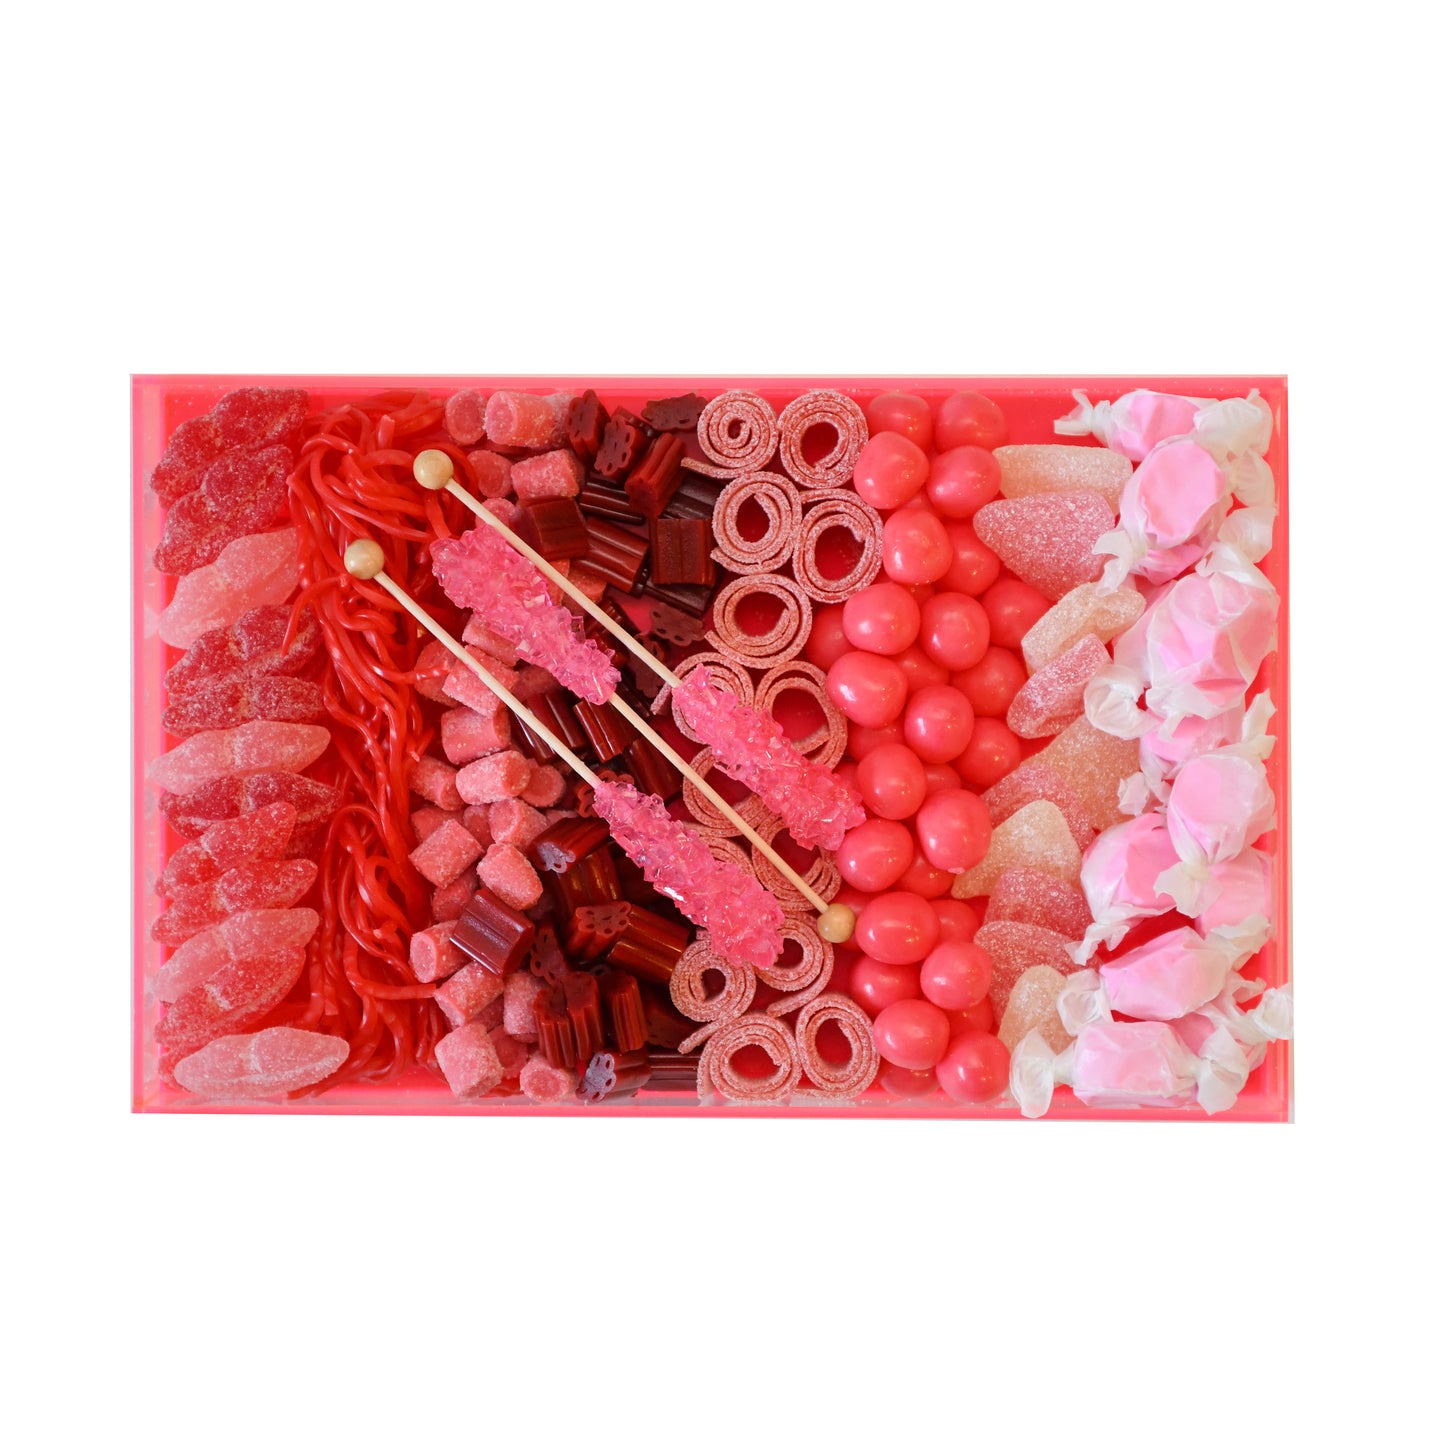 Pinking of you:) Pink Lucite tray